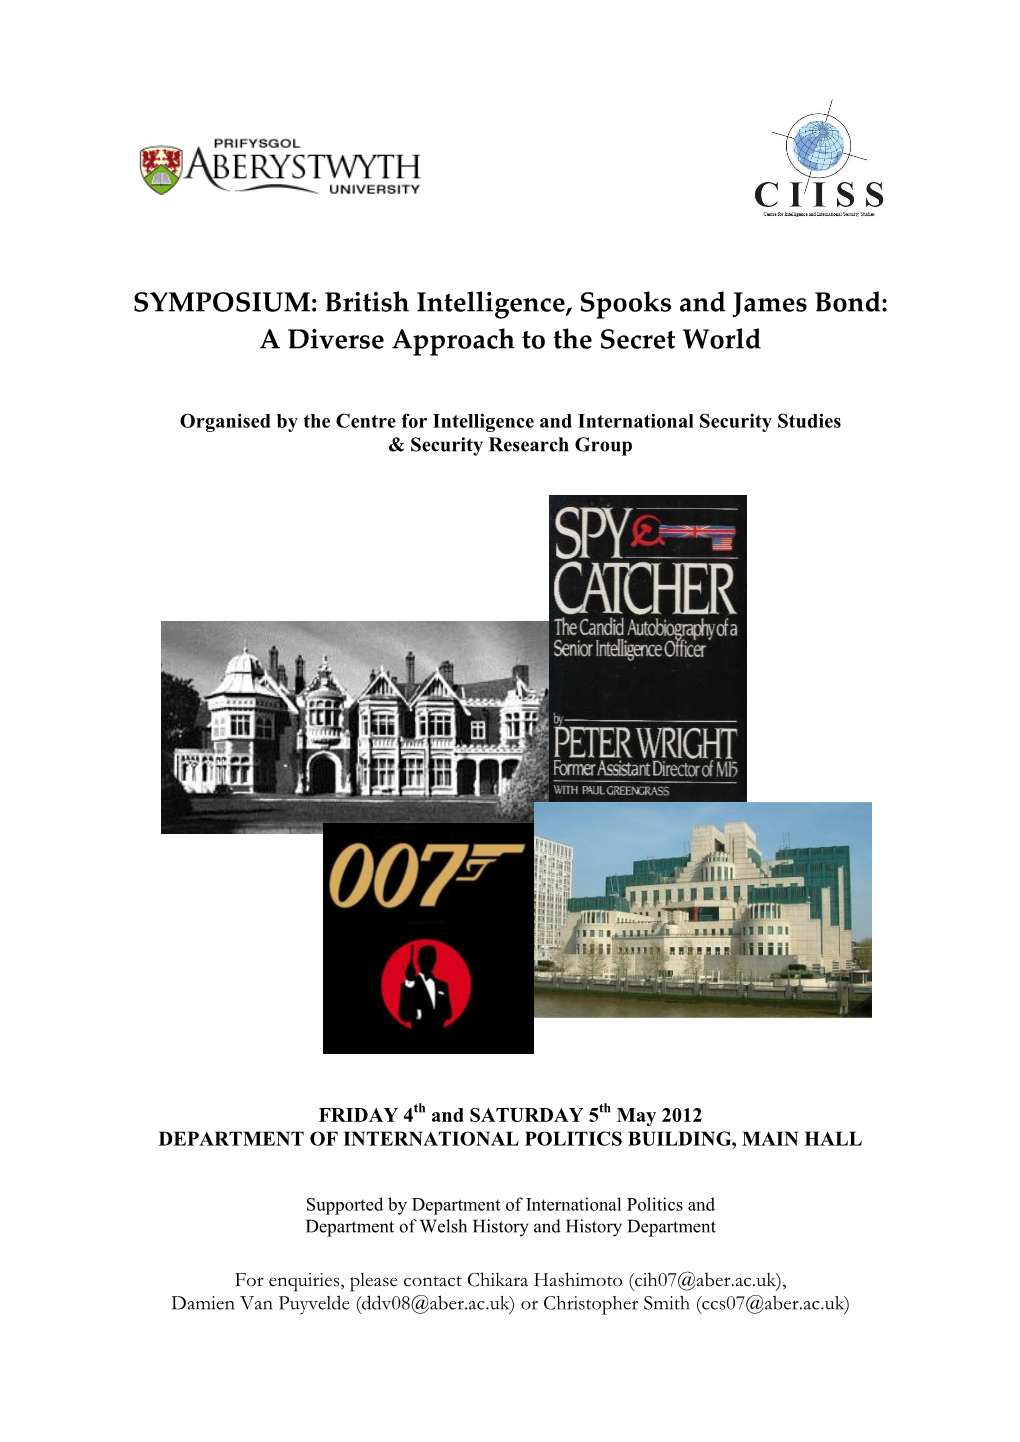 SYMPOSIUM: British Intelligence, Spooks and James Bond: a Diverse Approach to the Secret World